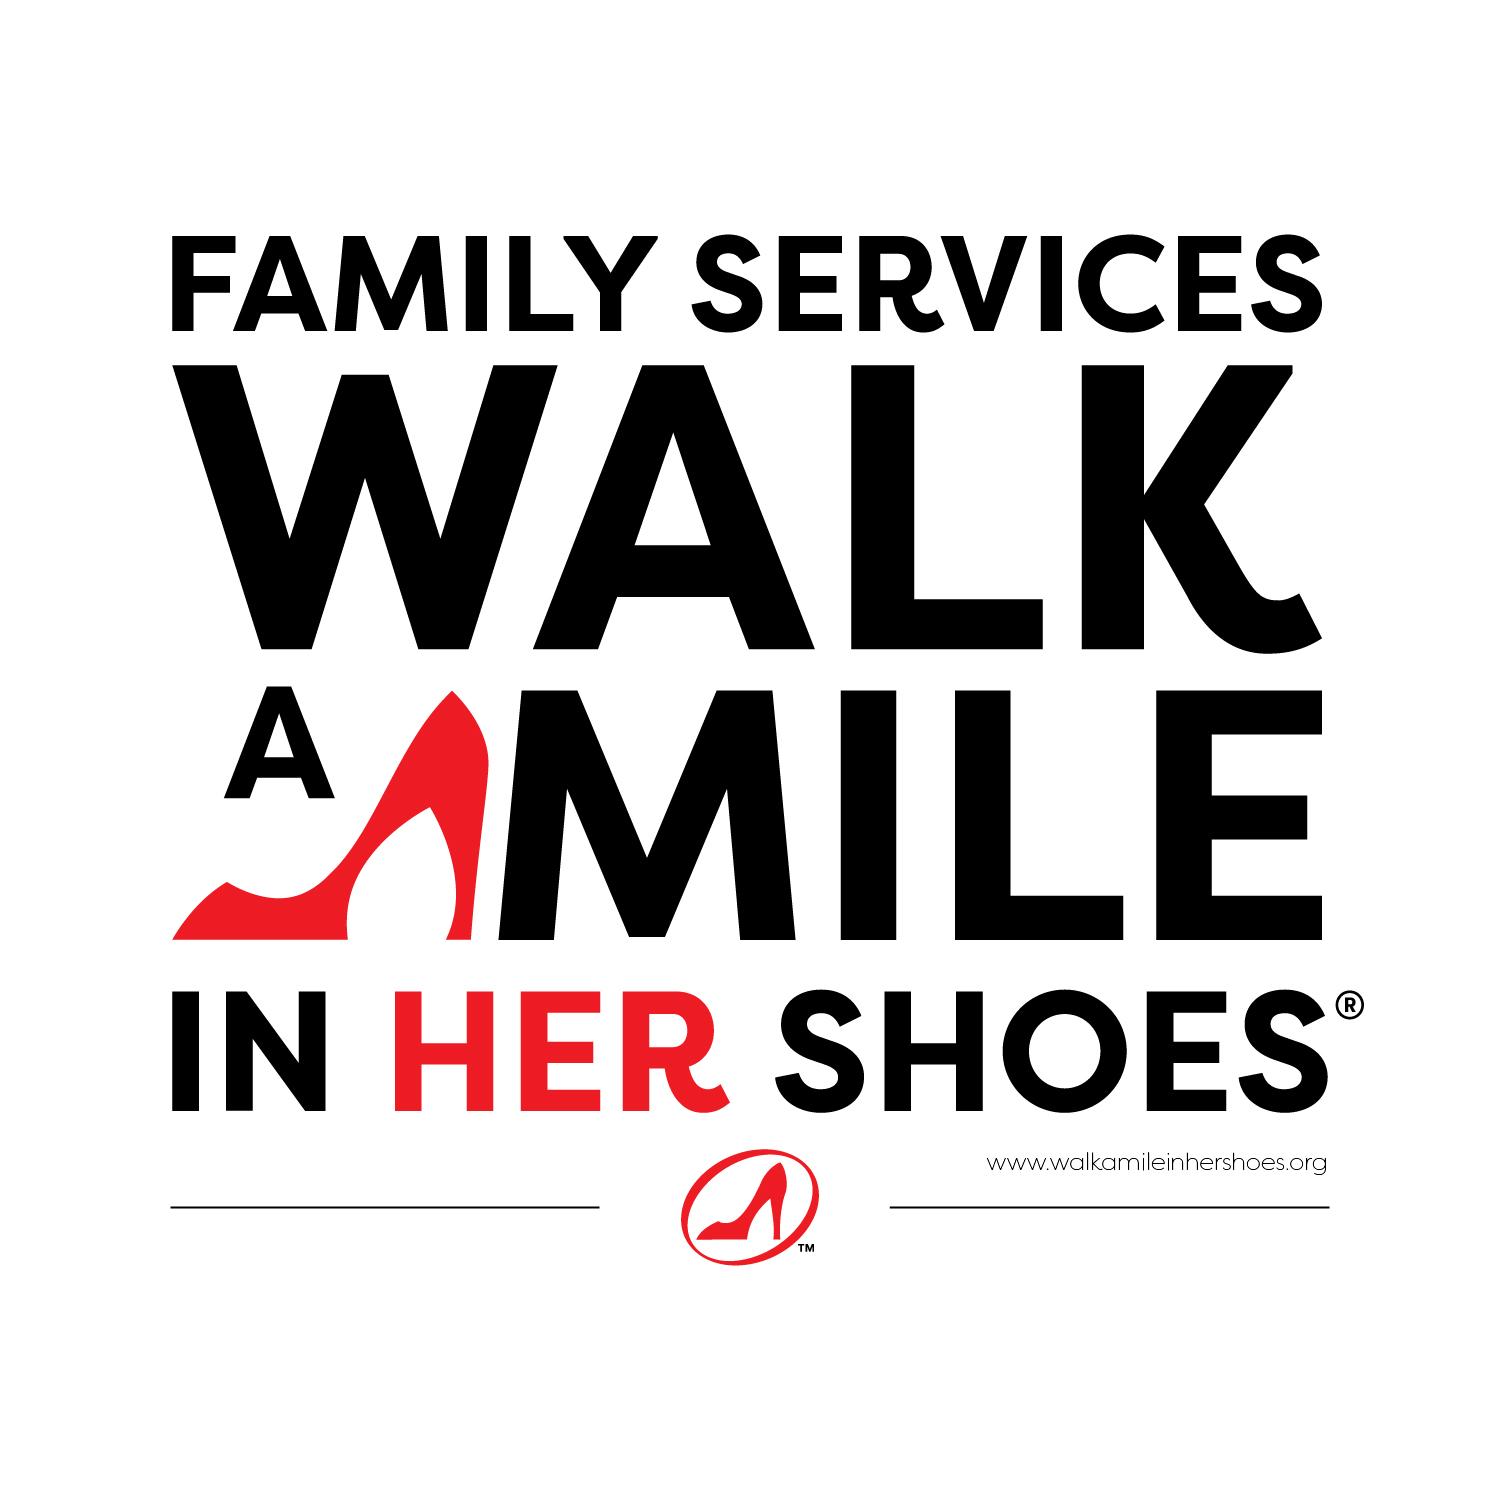 10th Annual Family Services Walk A Mile